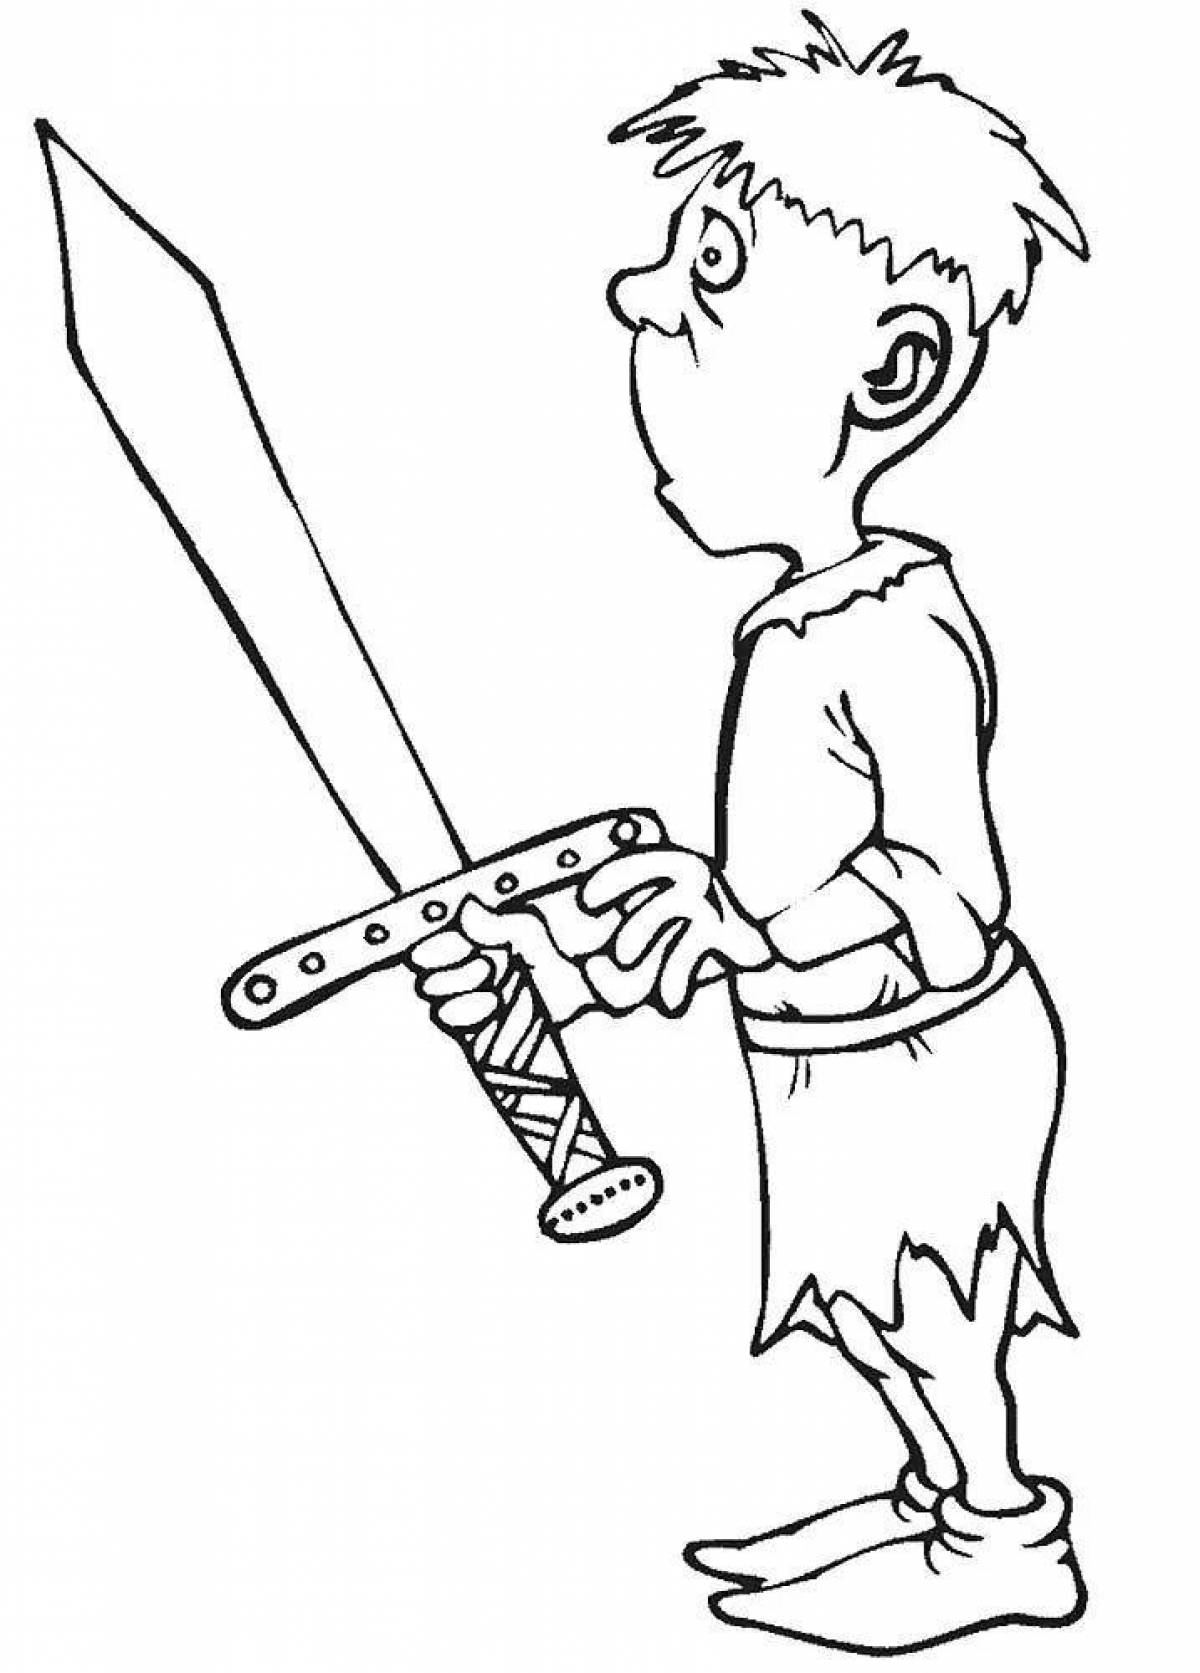 Tempting sword coloring page for kids